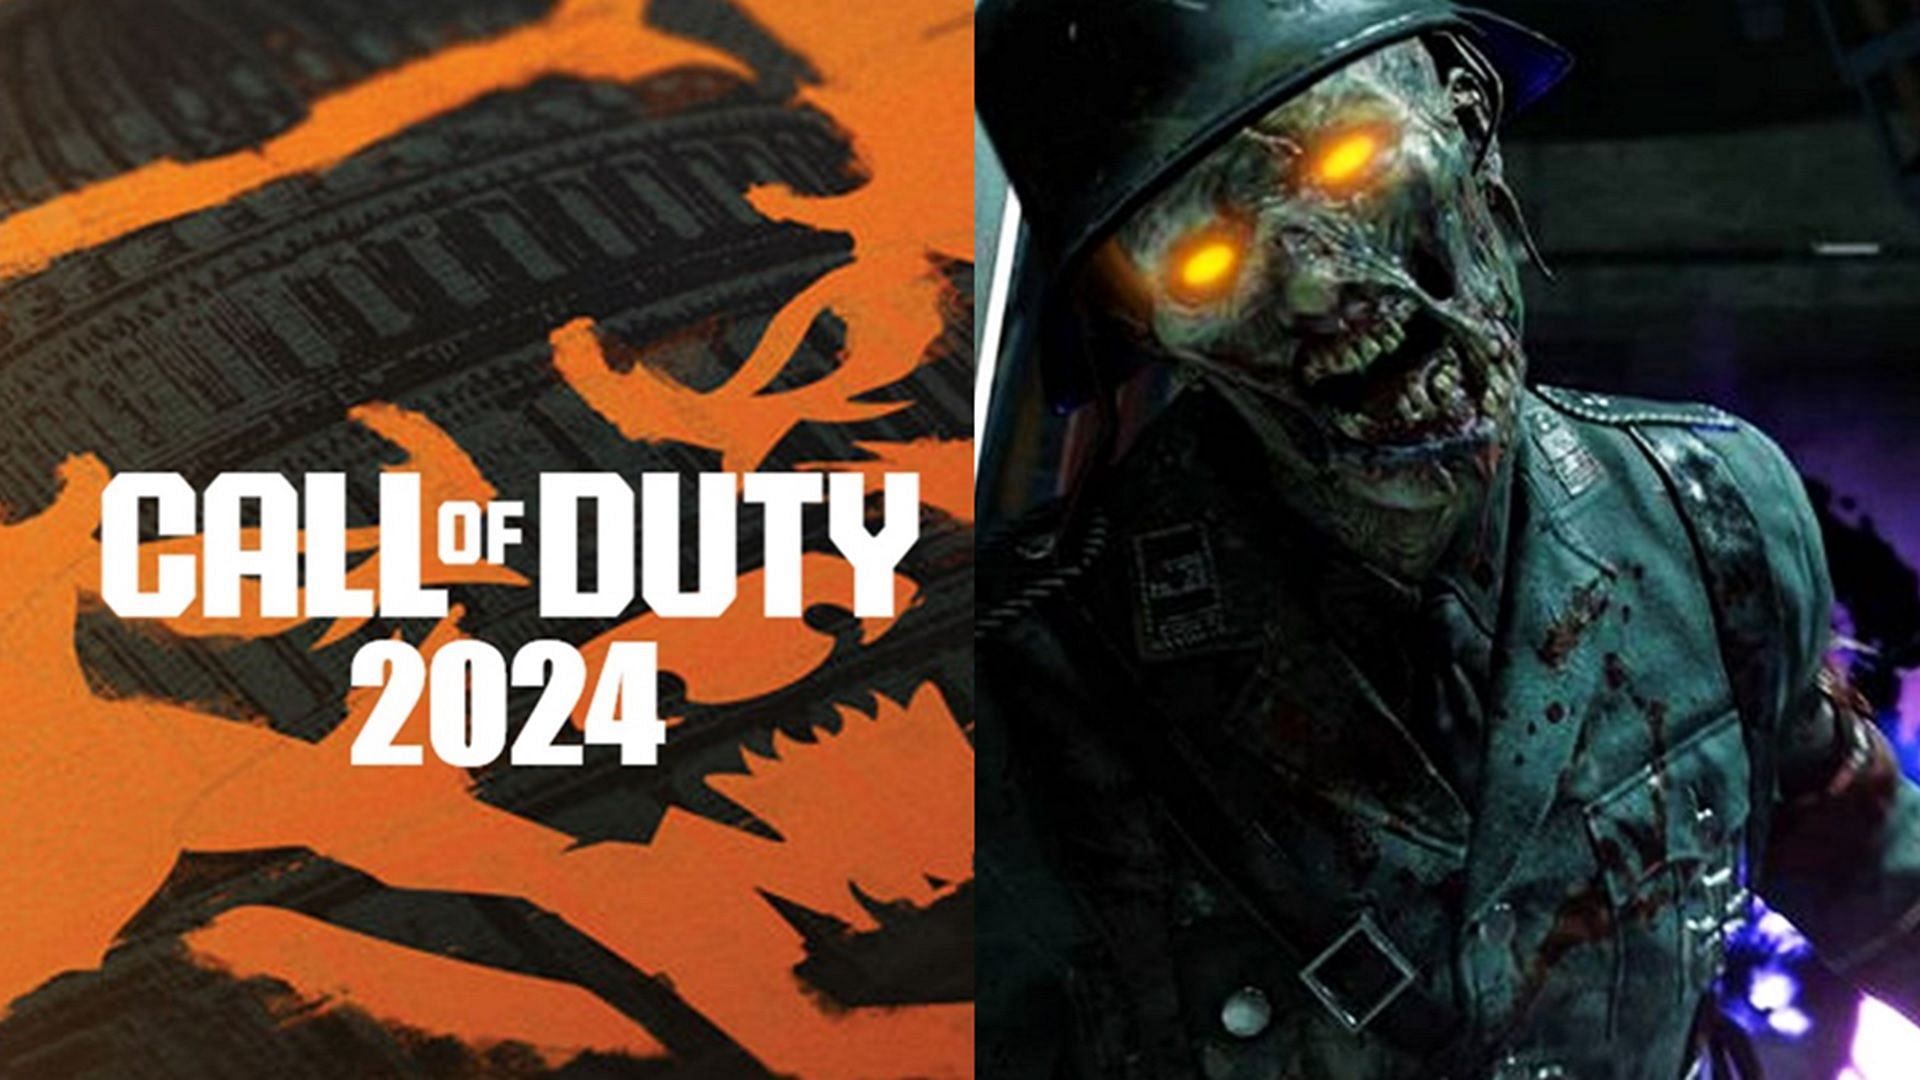 CoD 2024 has been the longest game in development so far in the FPS franchise (Image via Activision)